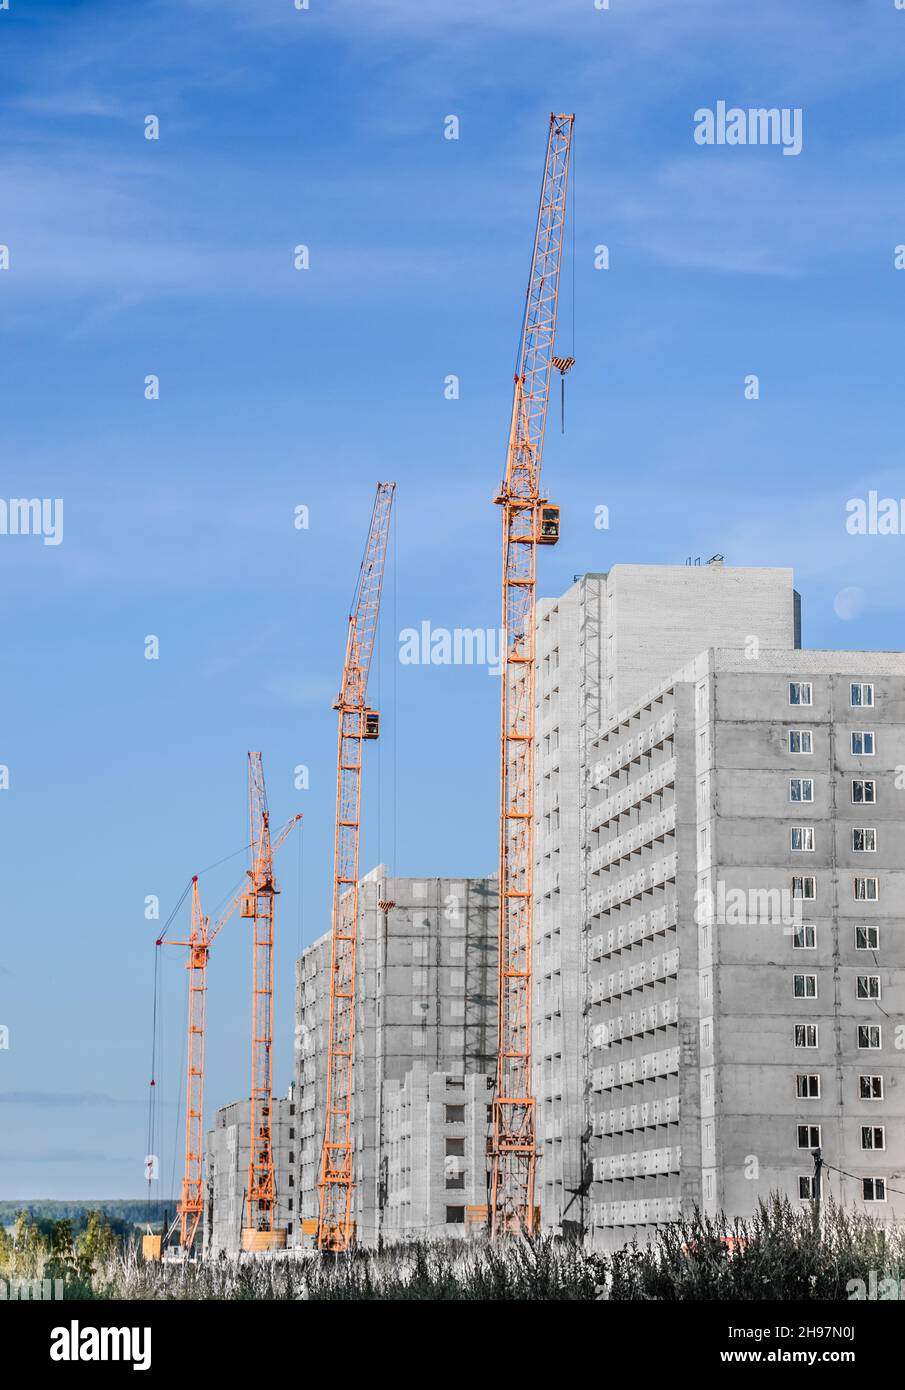 Building crane and building under construction against cloudy sky Stock Photo